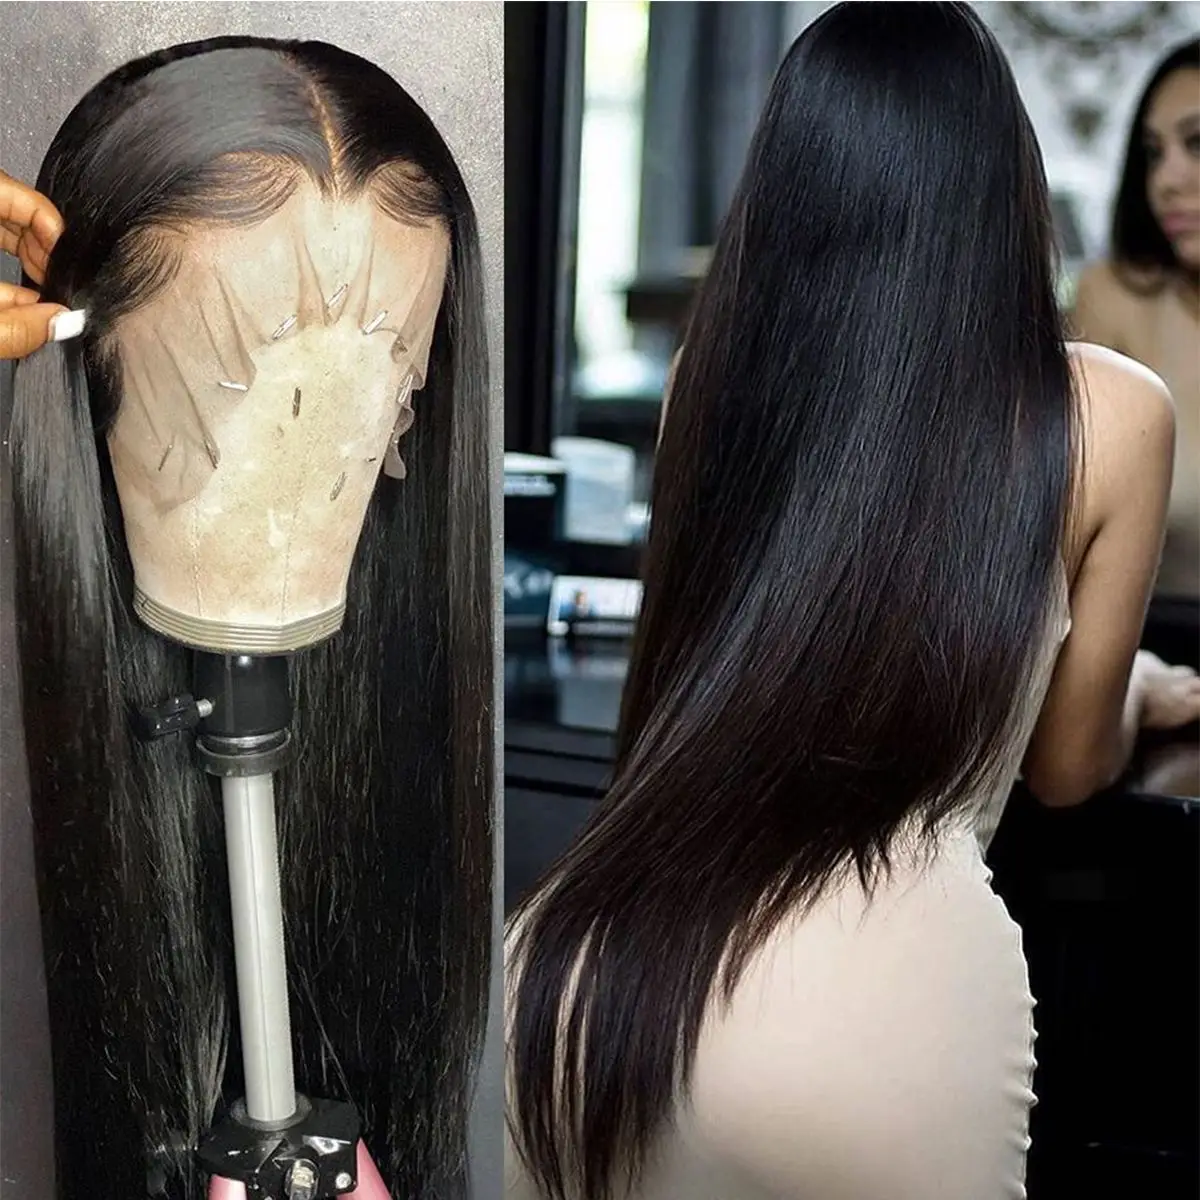 

Top Grade Hd Lace Front Wig With 200% Density, Cambodian Straight Virgin Human Hair Lace Front Wigs Plucked For Black Women